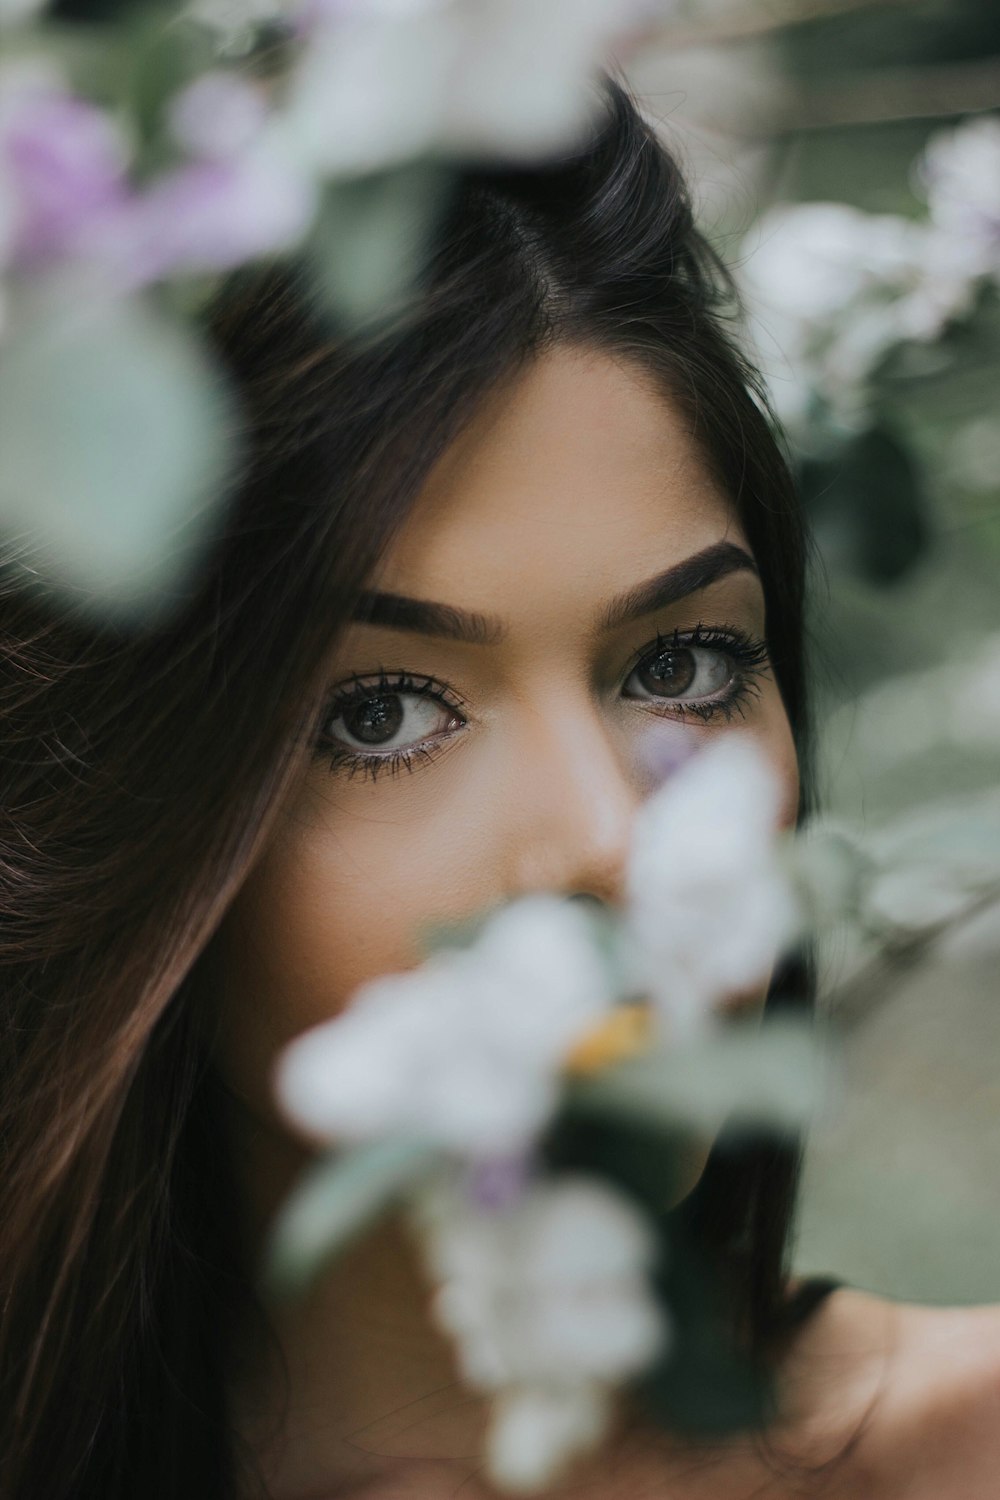 500+ Beautiful Eye Pictures [HD] | Download Free Images on Unsplash